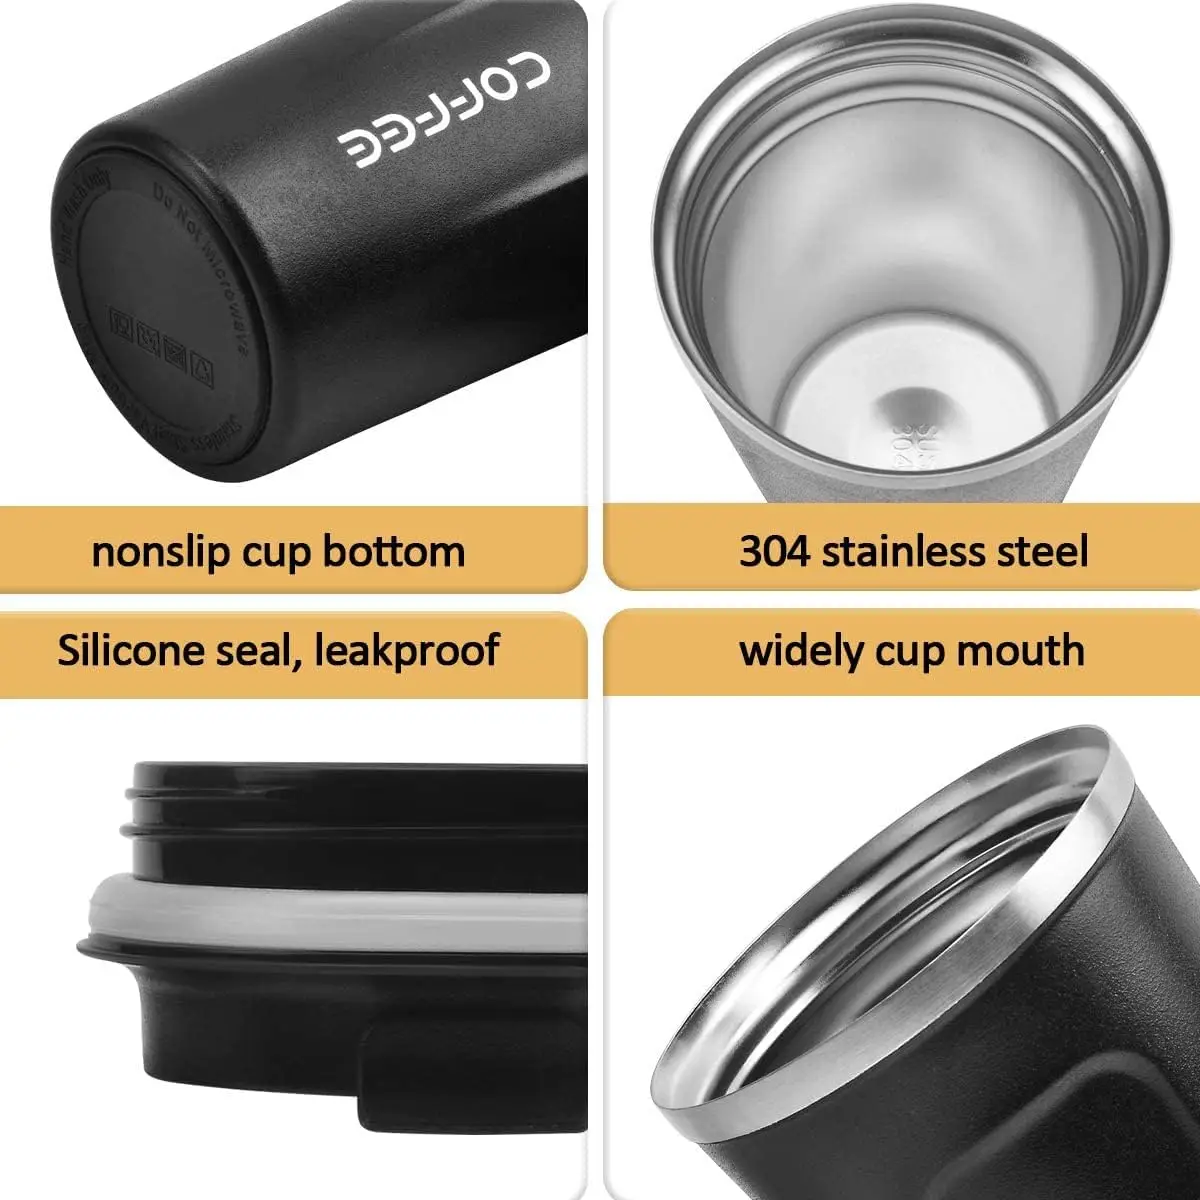 510ML Travel Coffee Mug Spill Proof with Seal Lid Insulated Eco-friendly  Drink Flavors Drinking Stainless Steel Coffee Cup - AliExpress